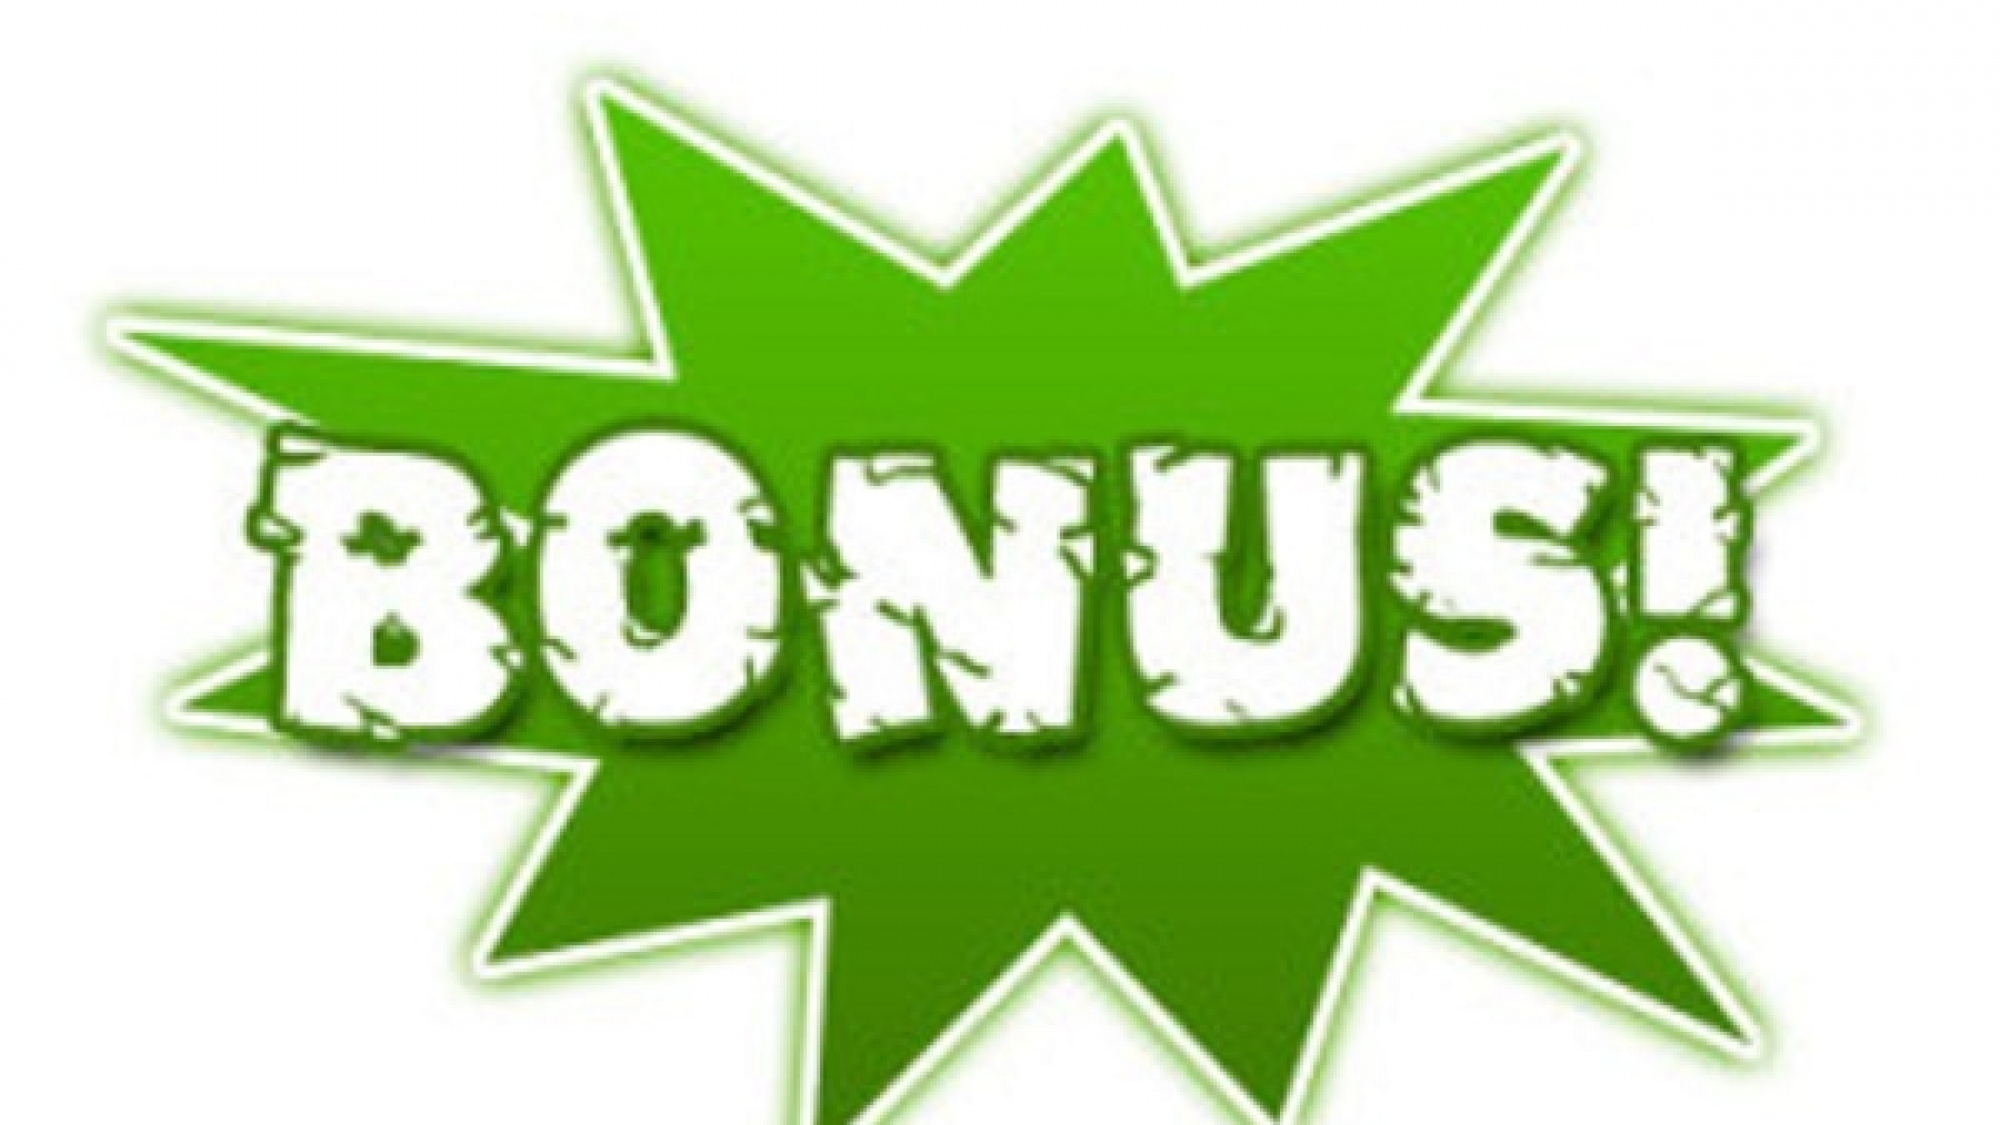 What are the bonuses